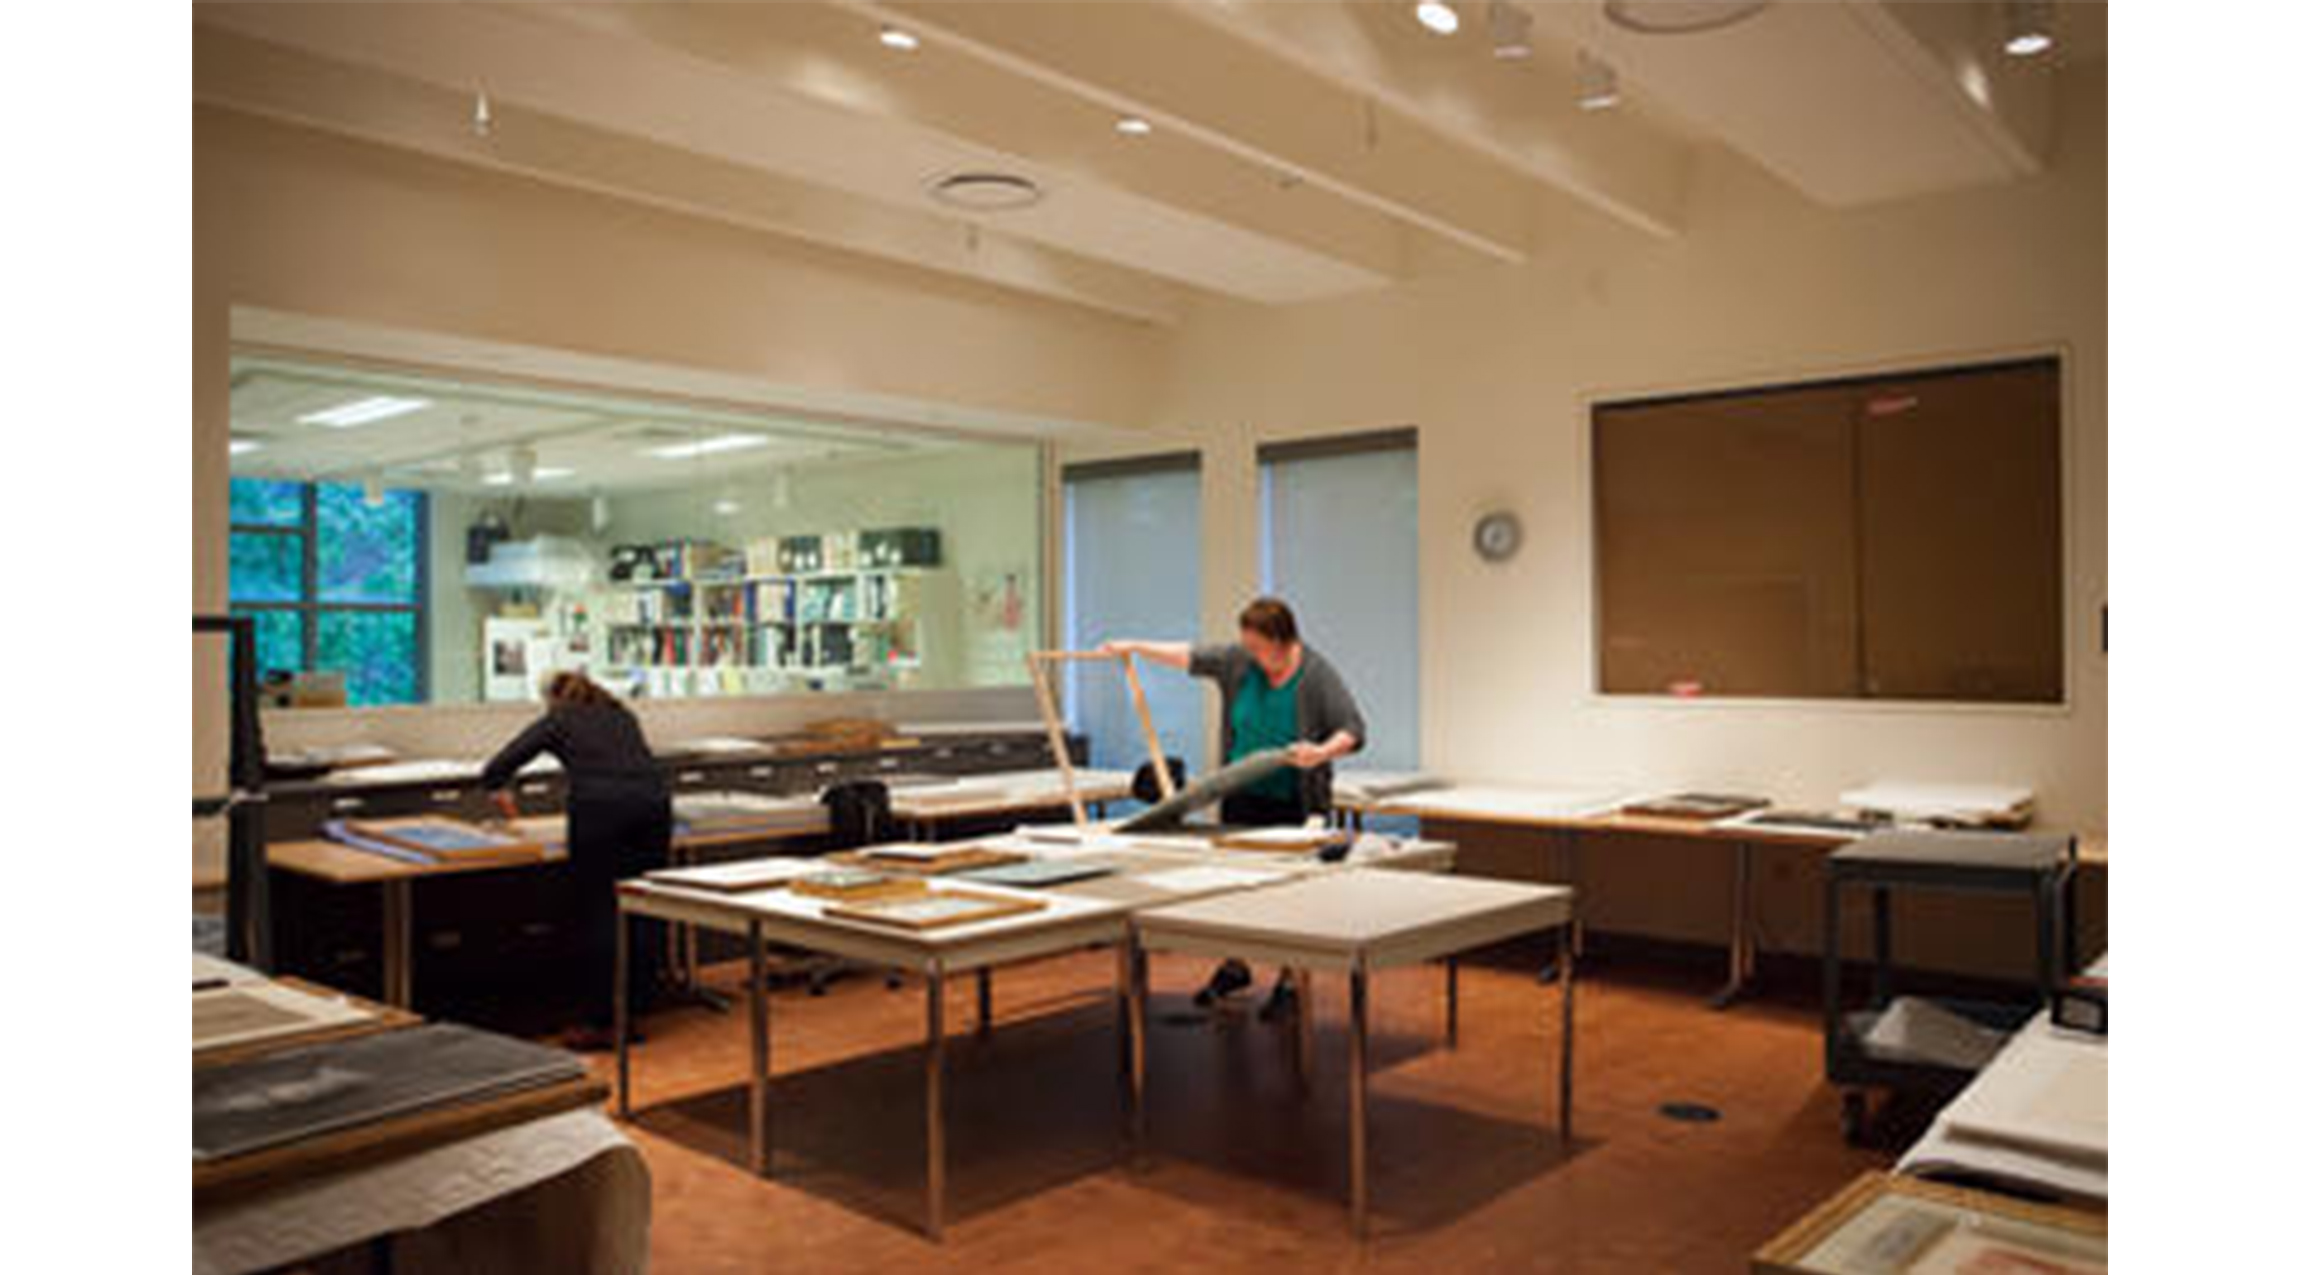 people standing in a large room with lots of tables. both are bent over a table handling framed artworks